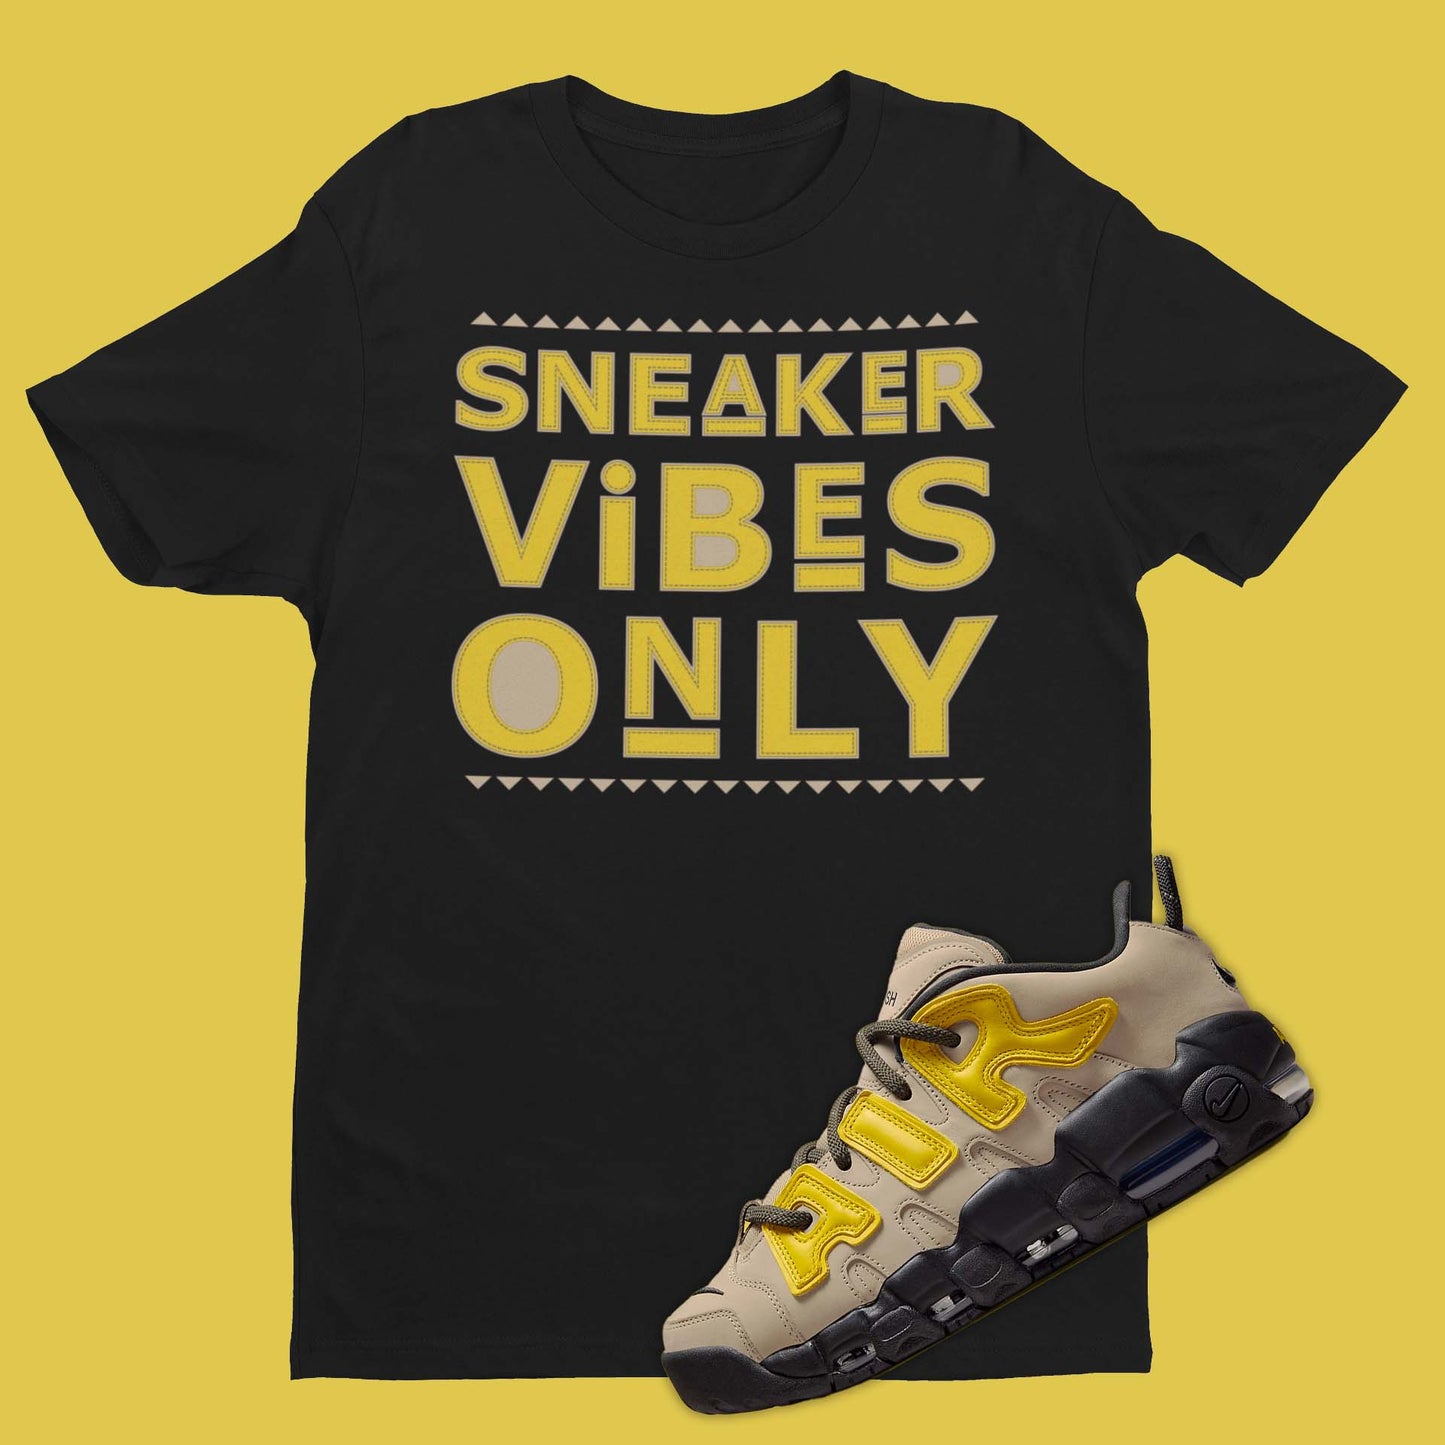 Nike Air More Uptempo Ambush Limestone Matching T-Shirt in black from SNKADX with 'sneaker vibes only' in the front